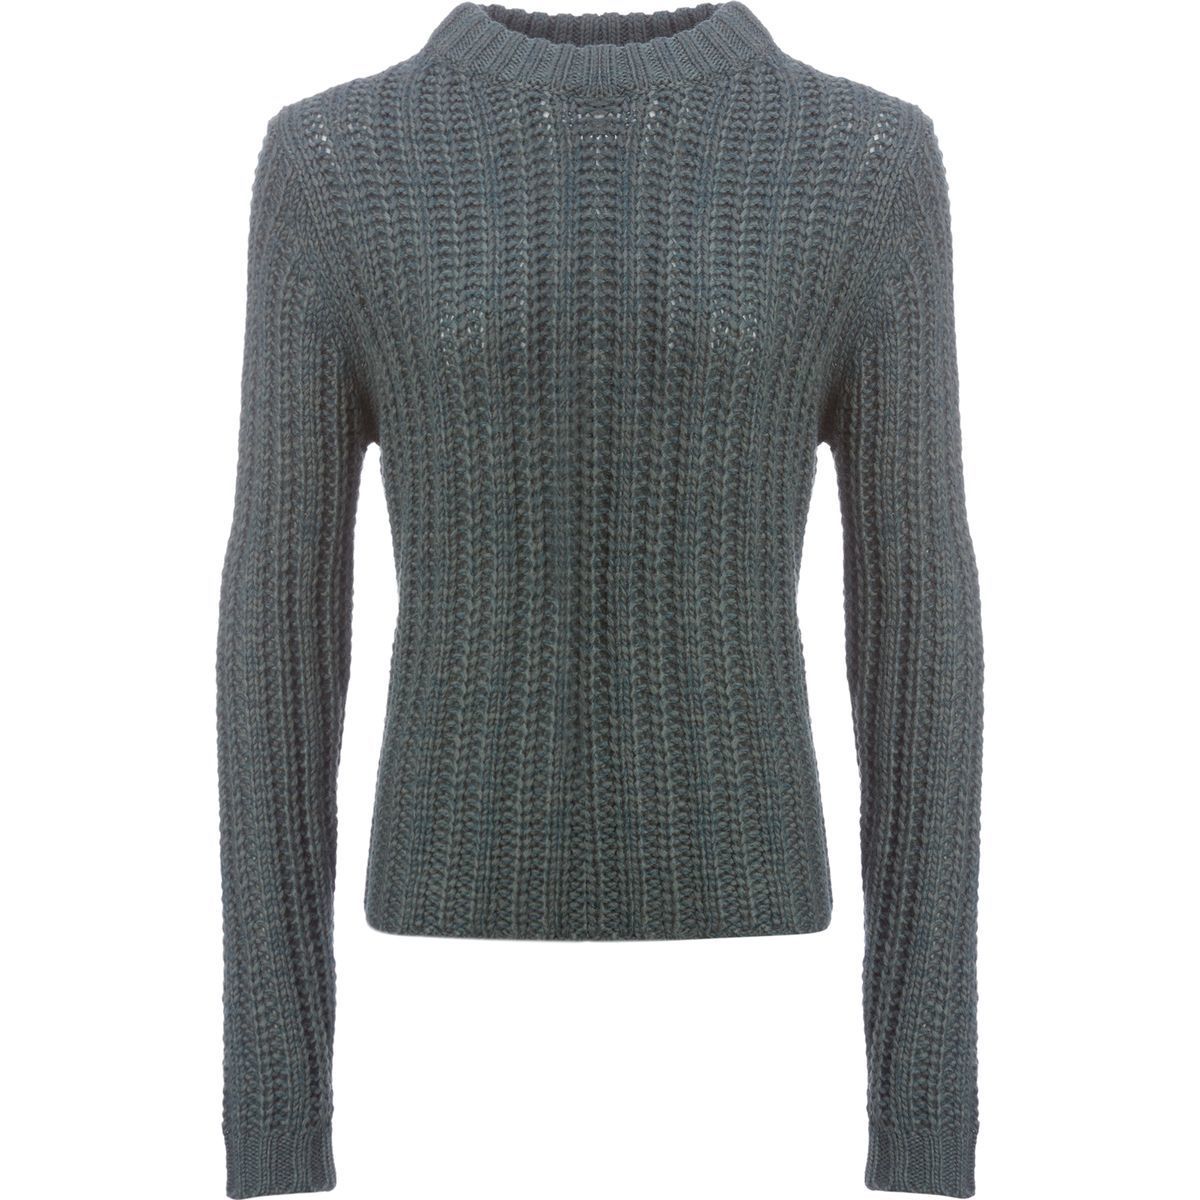 Carve Designs Cambria Sweater - Women's - Clothing